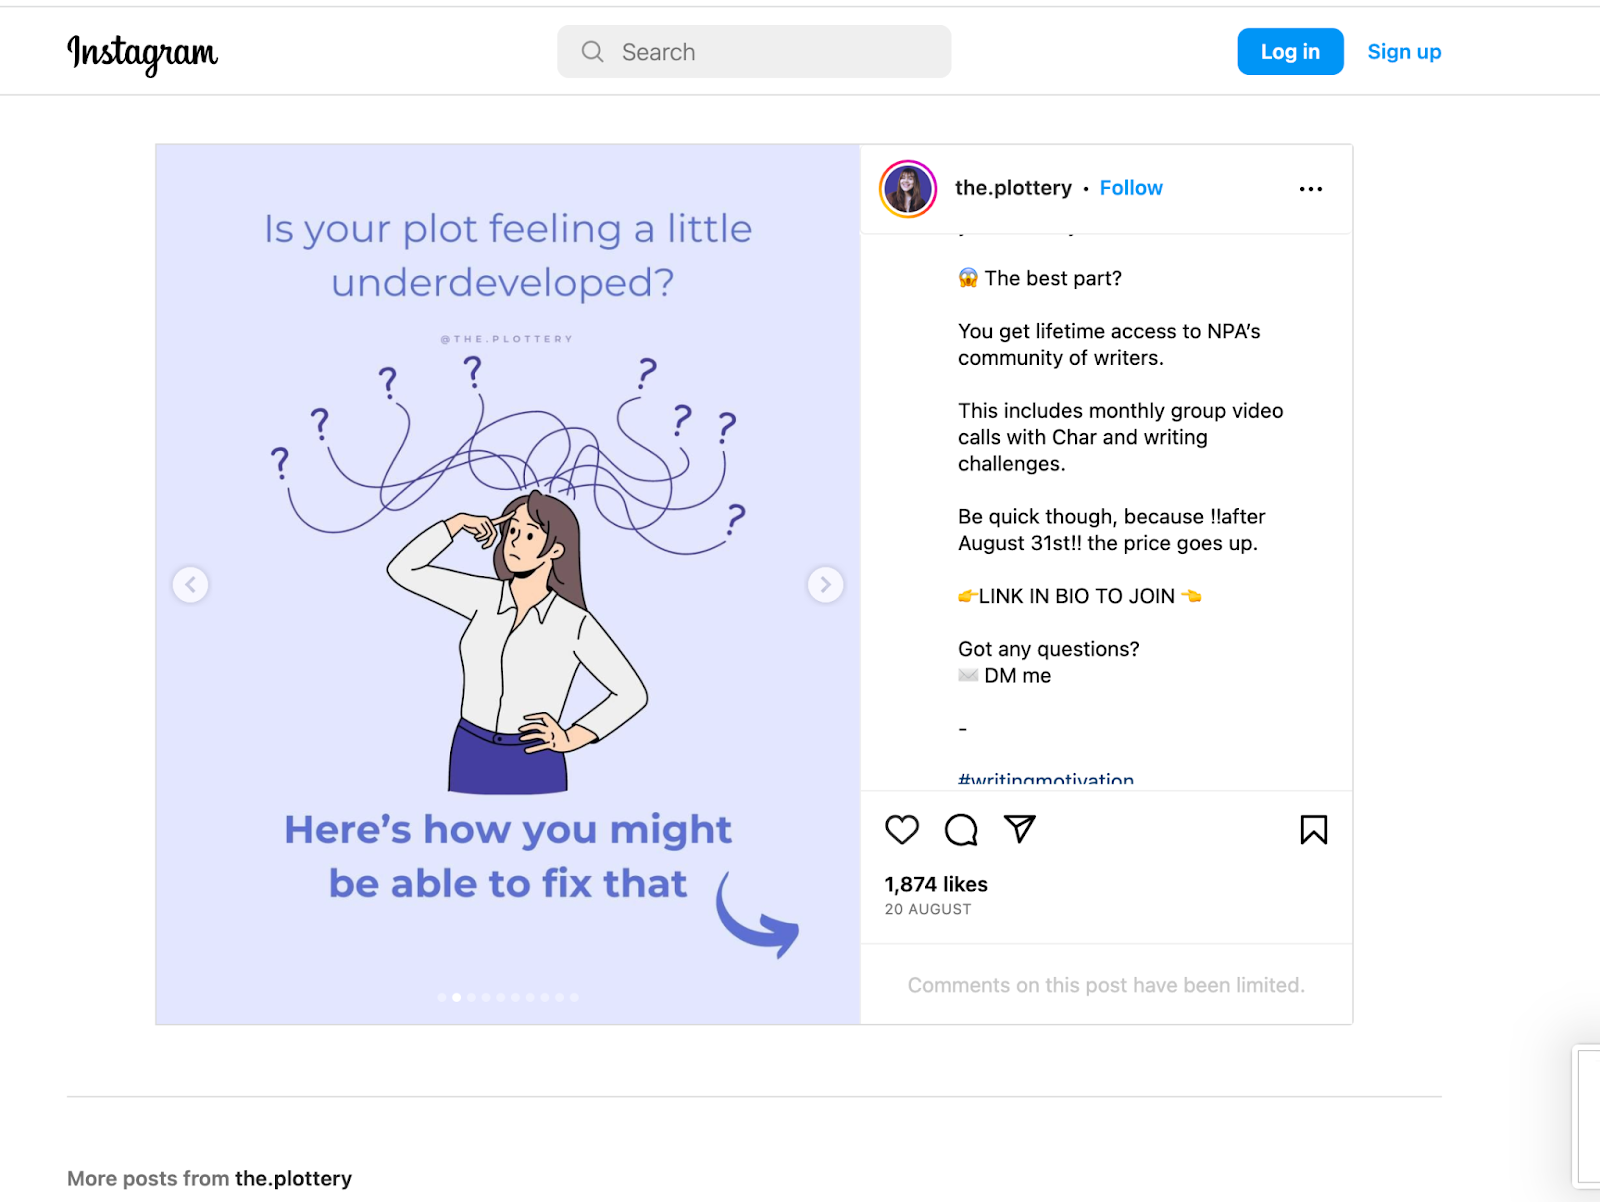 How to Effectively Promote Your Online Course on Instagram